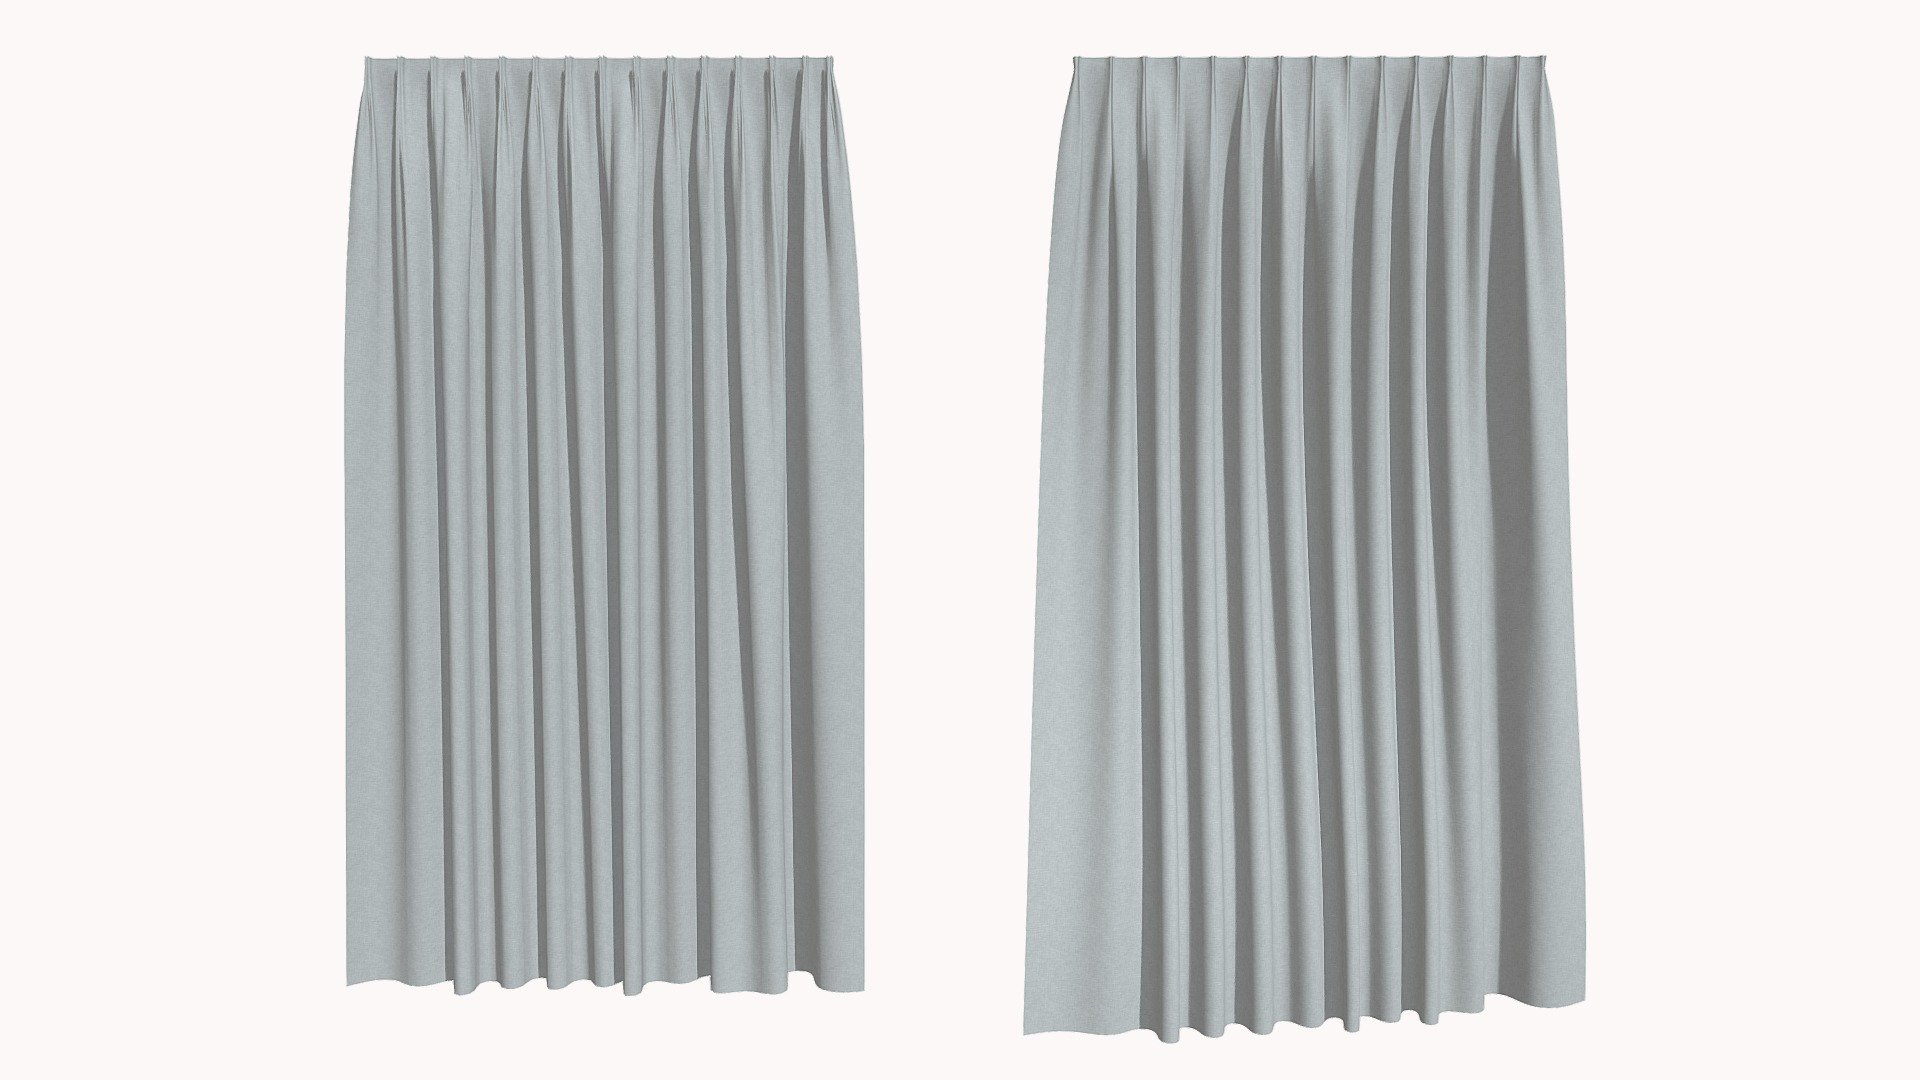 Curtains
A pair of curtains - one static and one with a subtle effect of blowing in the wind. Great for modern ArchViz scenes.

Height: 270 cm (can be easily scaled to match your scene without loosing proportions)




UV unwrapped

Subdivision ready

Quad based topology

2K Textures

TIP: For Blender users, light transmission effect can be achived by adding Solidify modifier and adjusting material's Subsurface.

Contains .BLEND and .FBX files 3d model